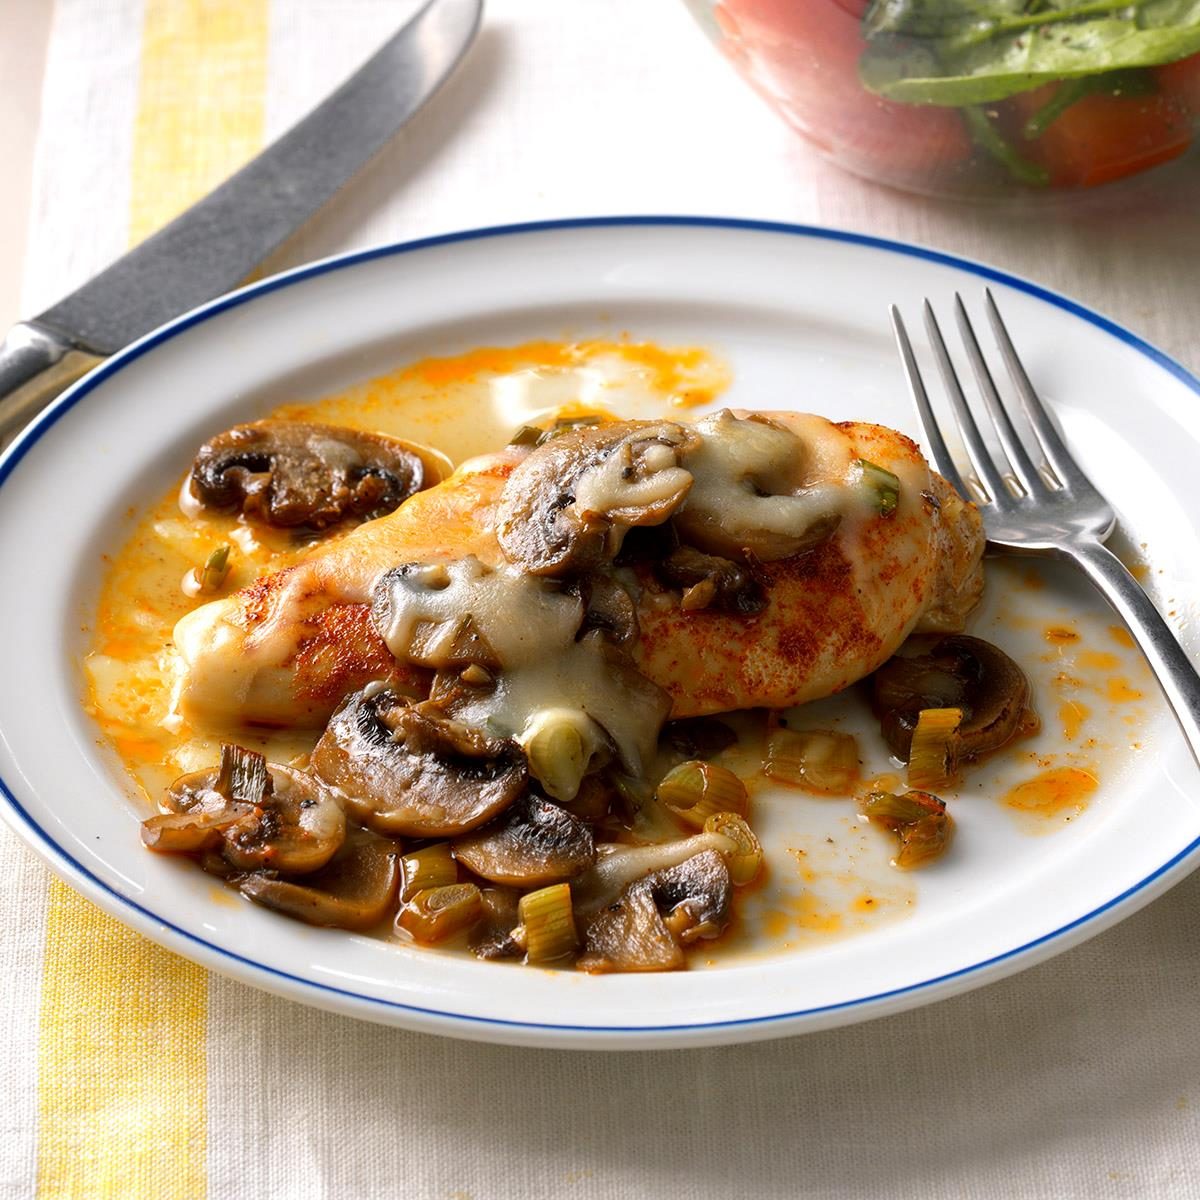 Baked Chicken and Mushrooms Recipe: How to Make It